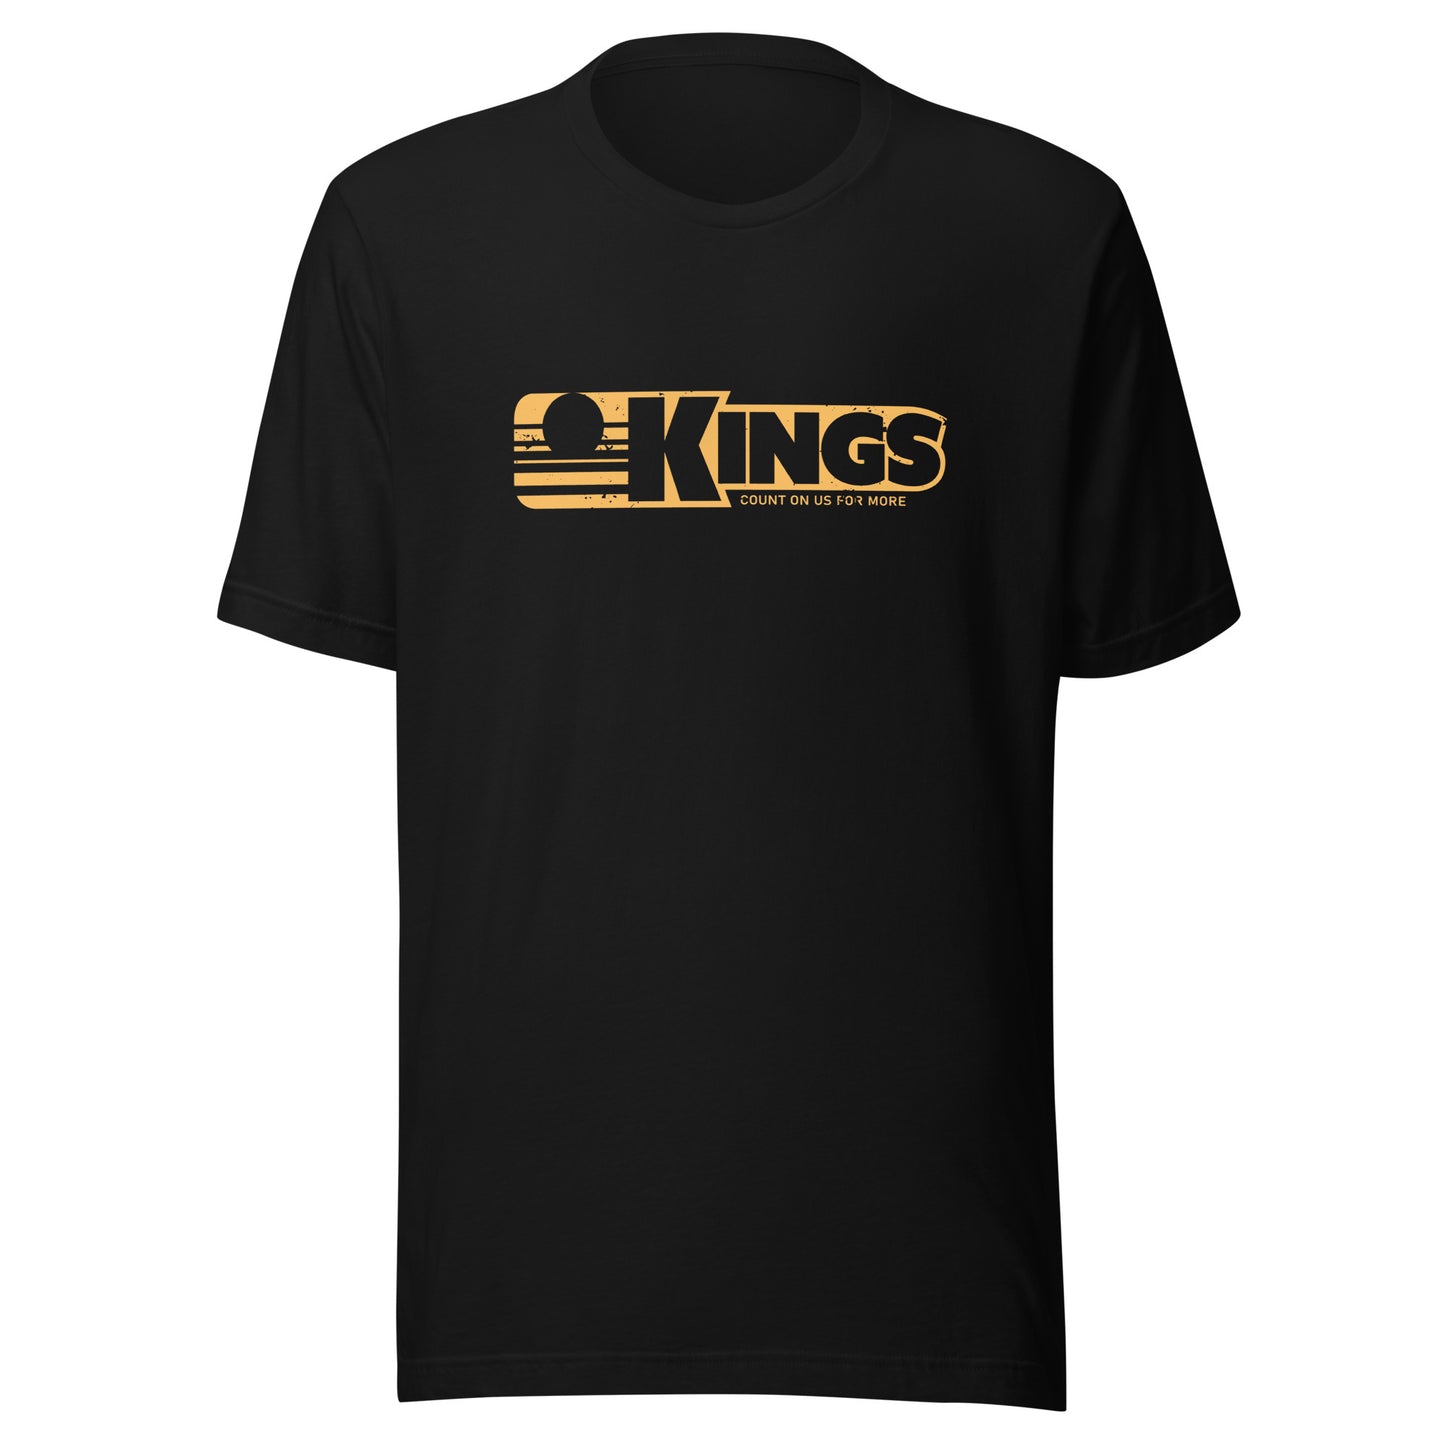 King's Department Store Retro T-Shirt - Vintage Mens & Womens Graphic Tee